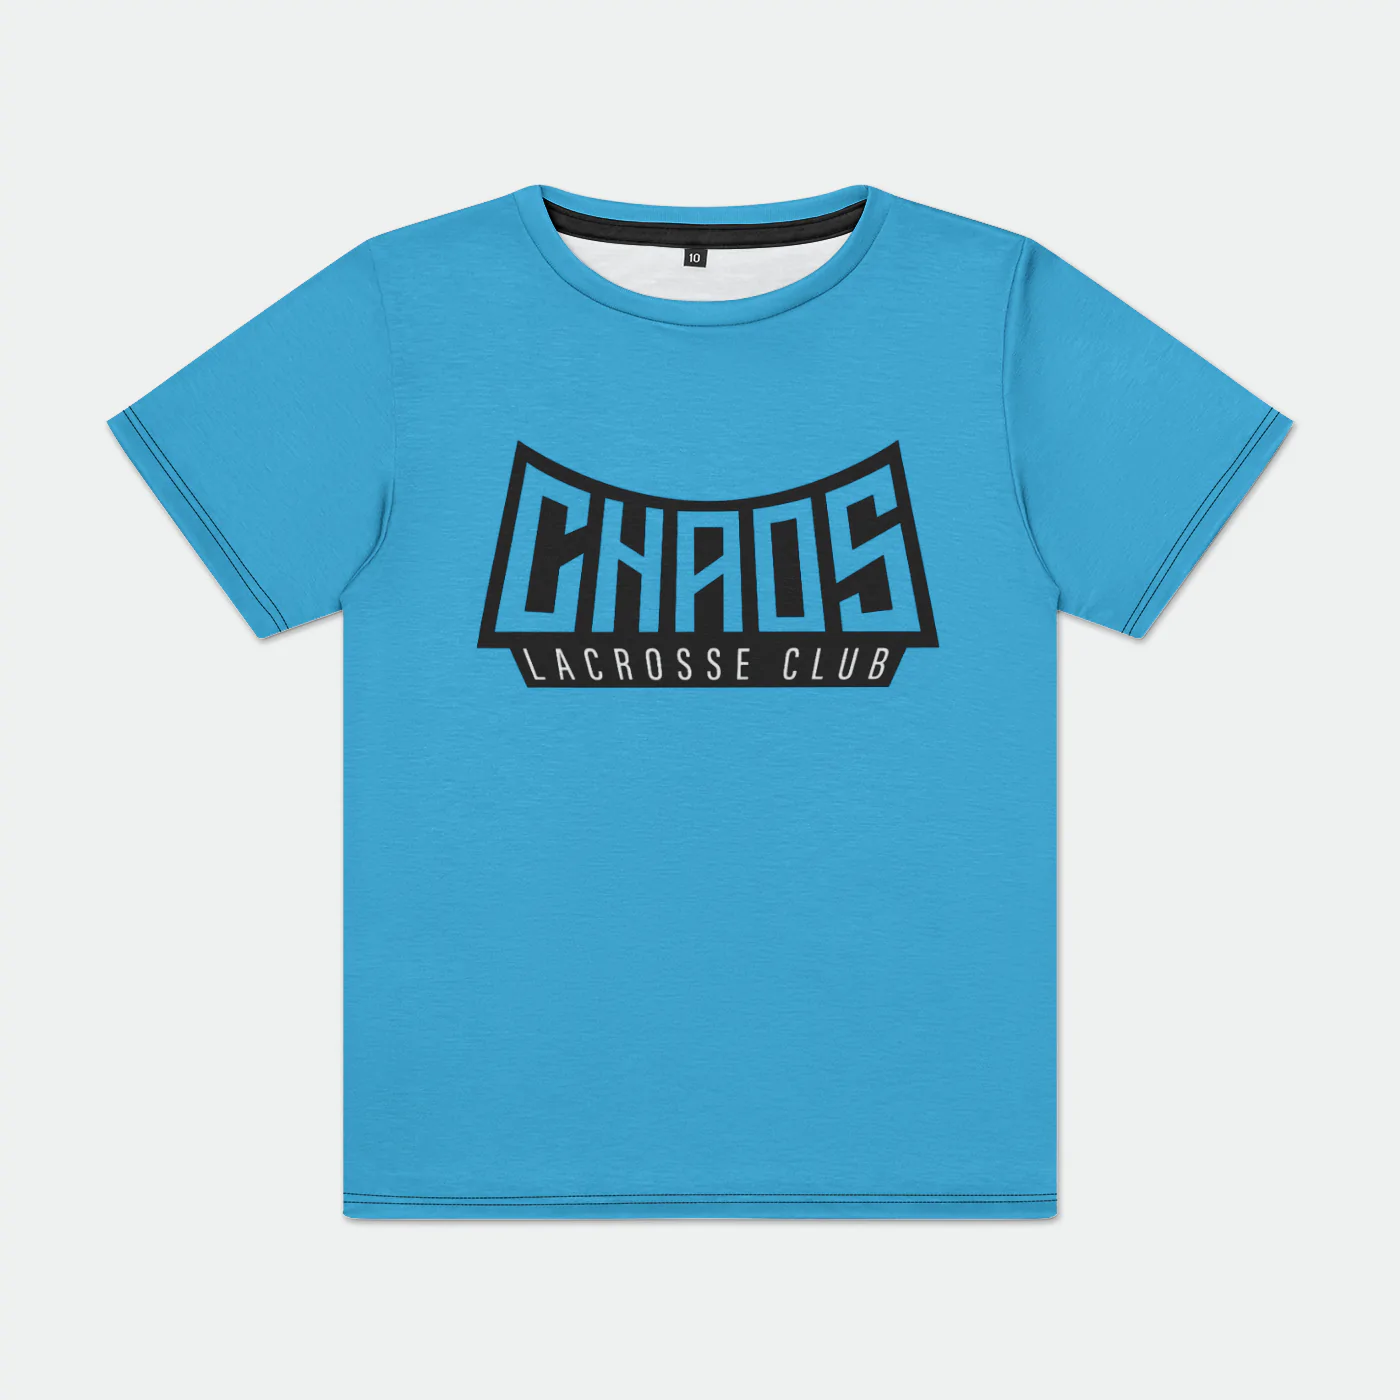 Chaos LC Youth Sport T-Shirt Signature Lacrosse